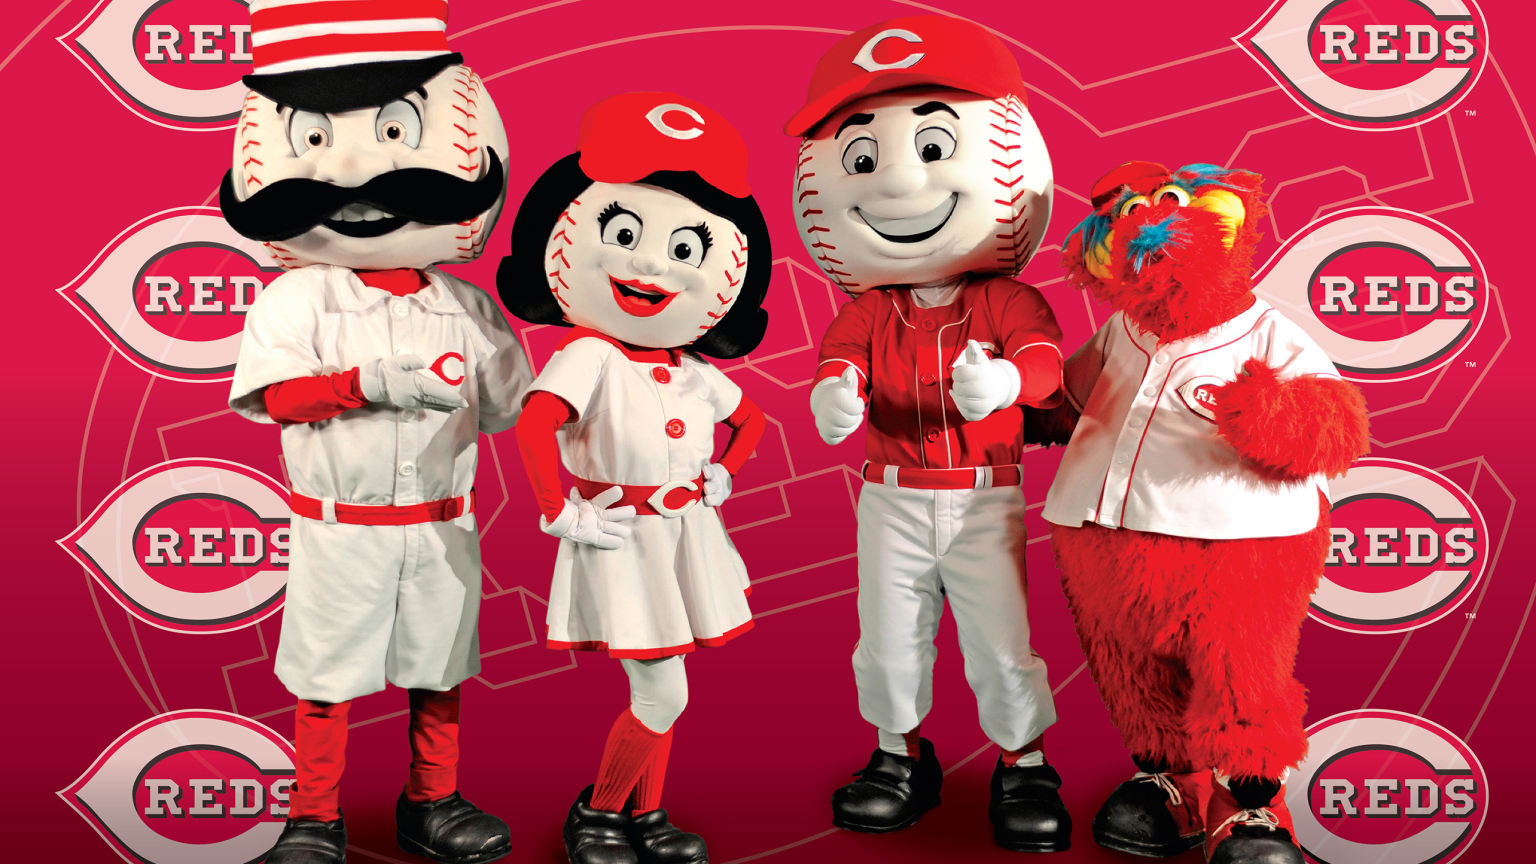 Did you know that the Cincinnati Reds have four different mascots